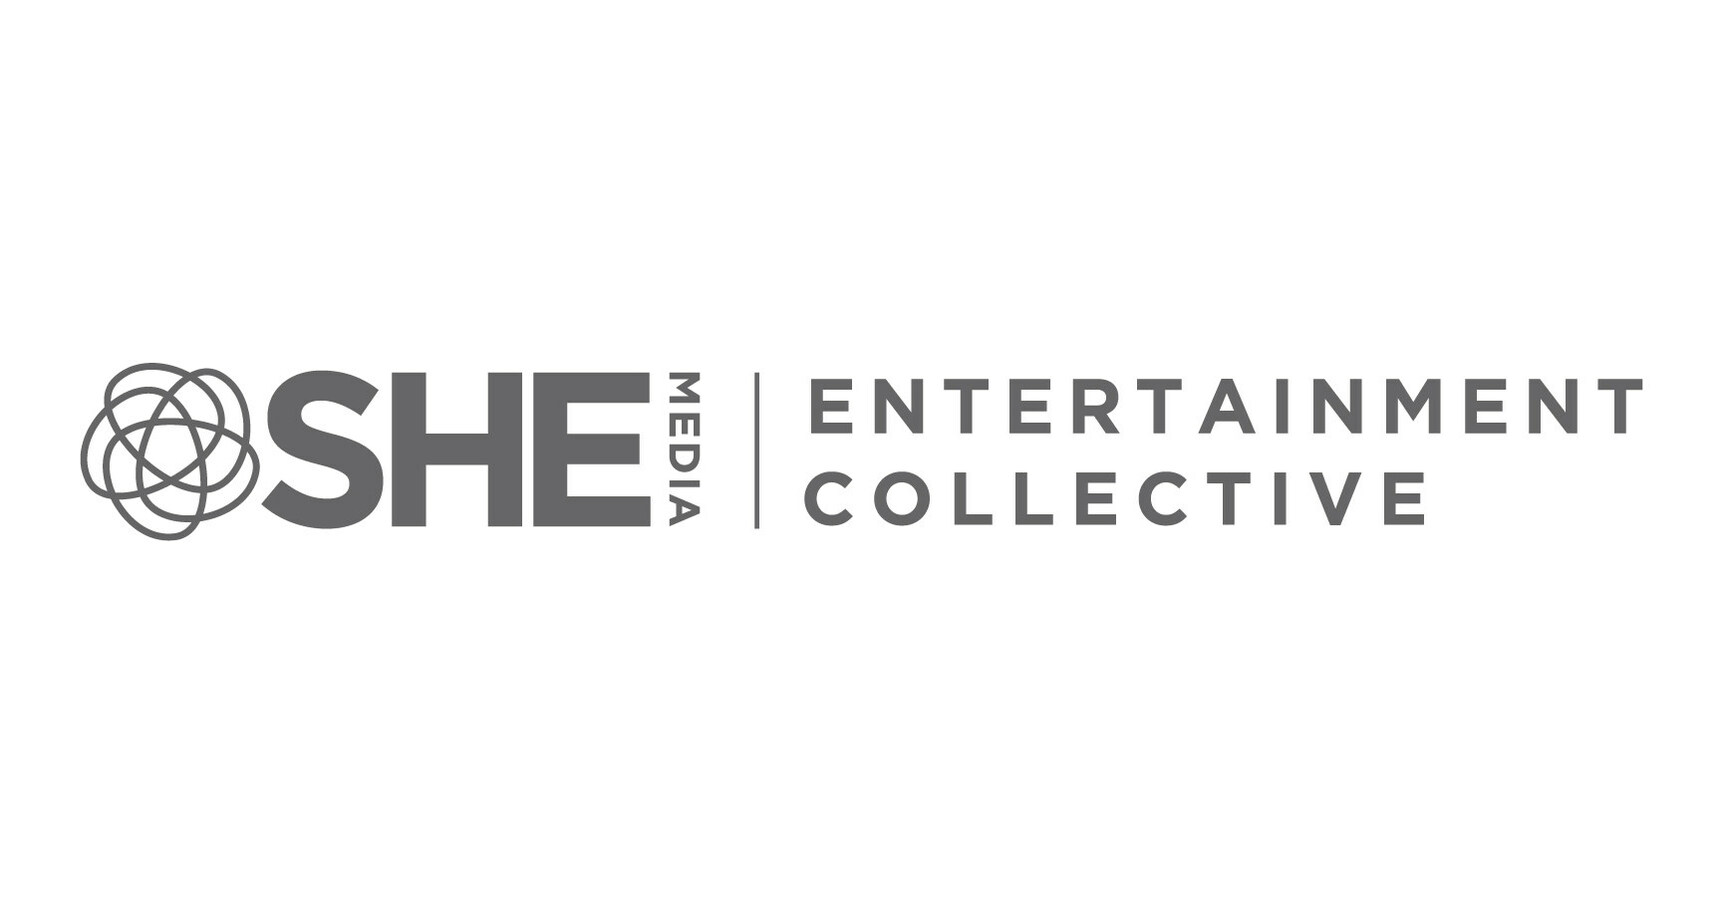 Introducing SHE Media’s Amusement Collective, a Initially-of-its-Variety Curation of the Most Influential Voices in Amusement